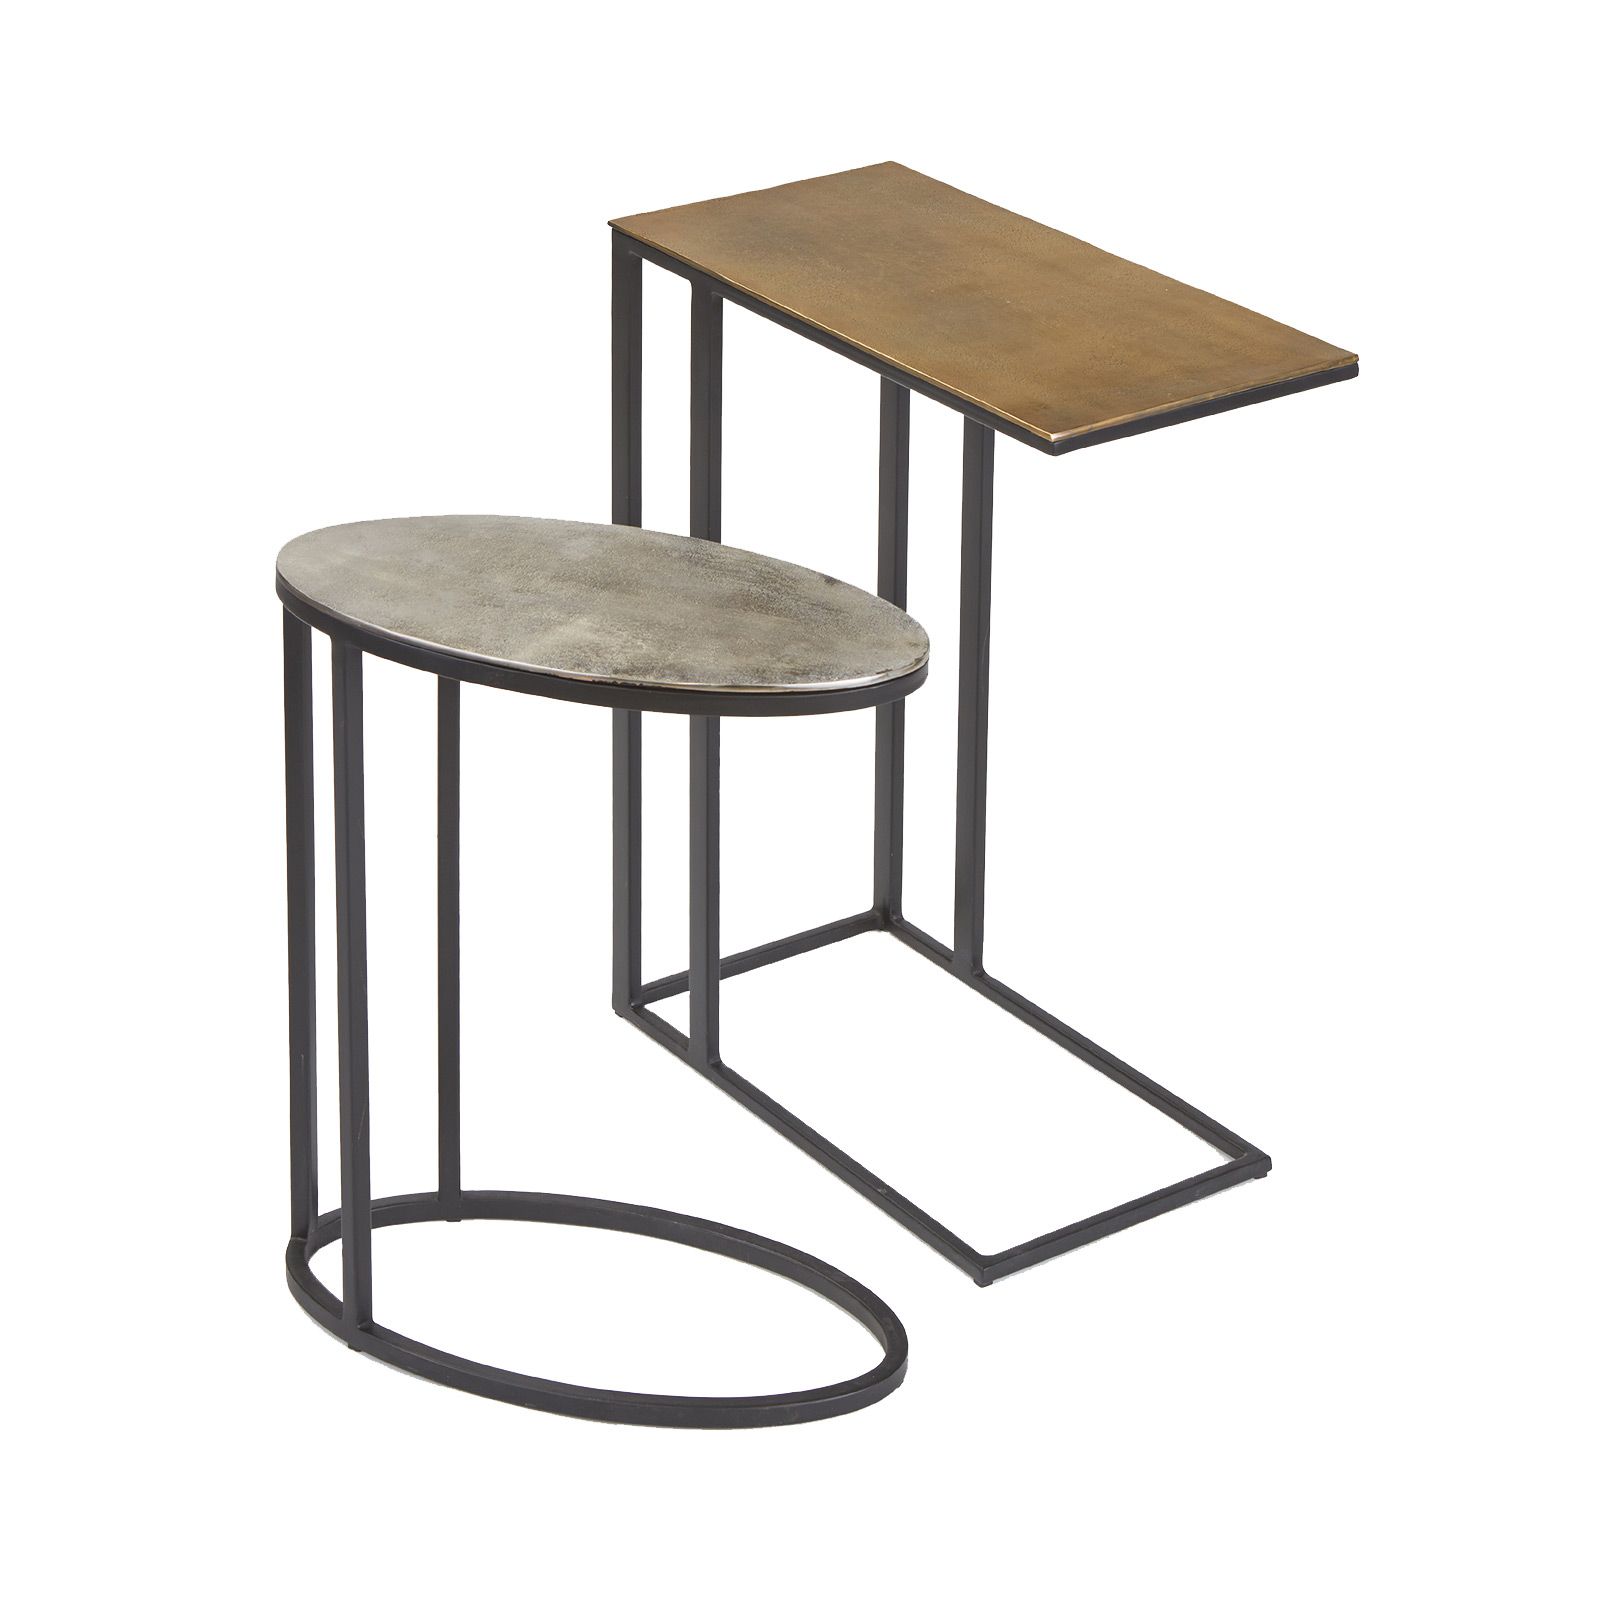 can something useful and convenient these claiborne accent knurl nesting tables also integral element ikea plastic storage boxes mirrored console table black cherry coffee side